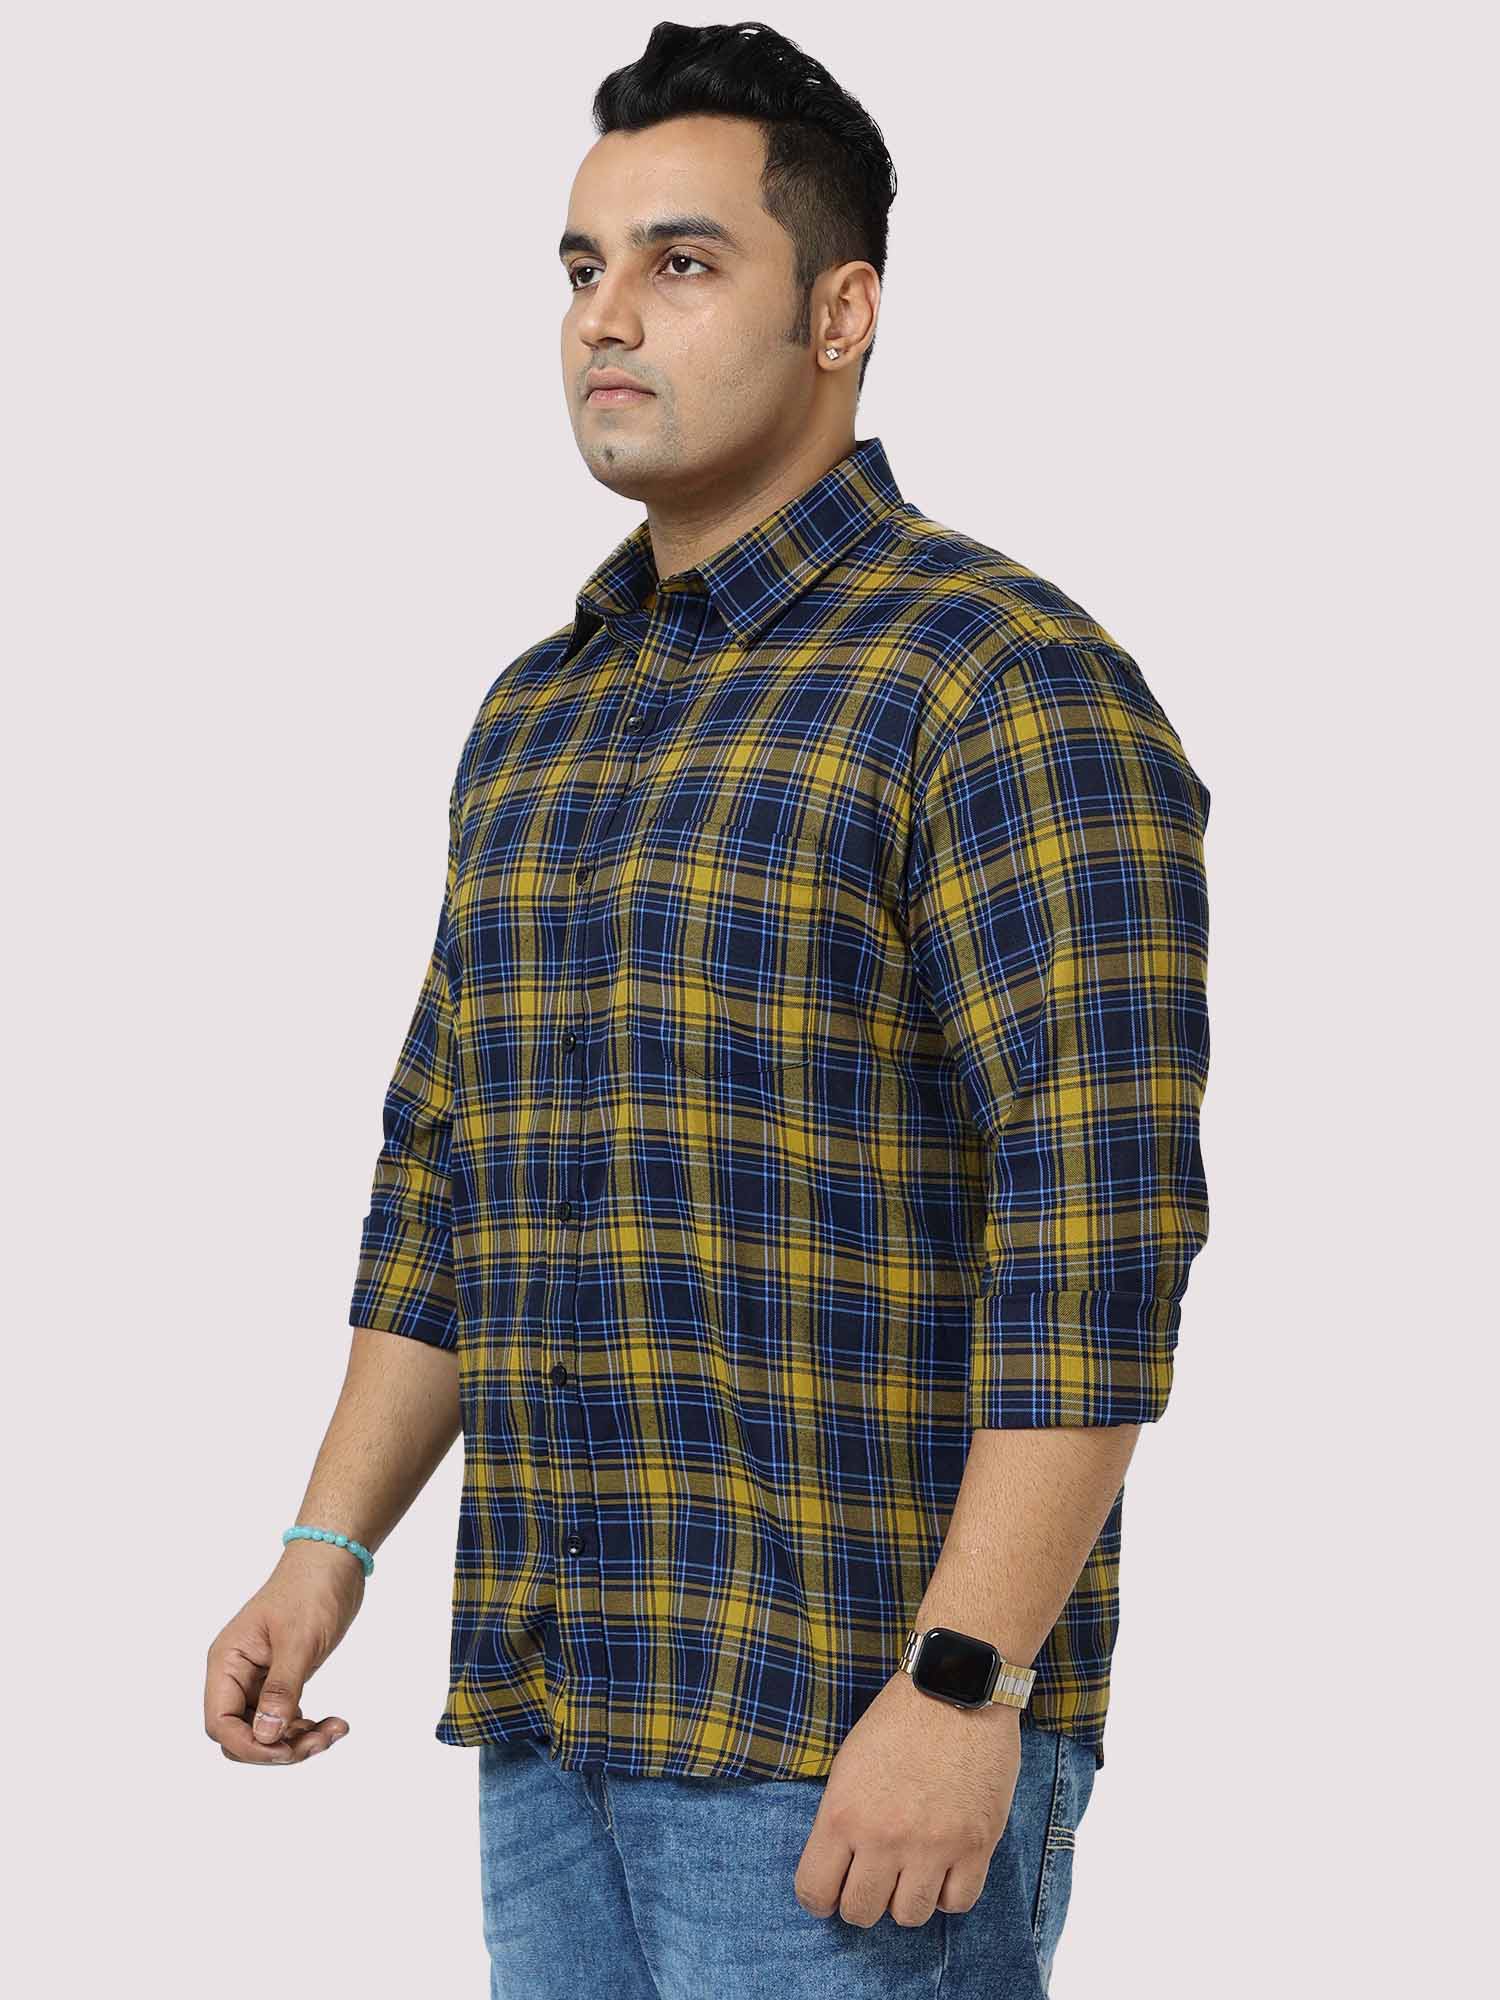 Yellow and Navy Blue Checkered Full Shirt Men's Plus Size